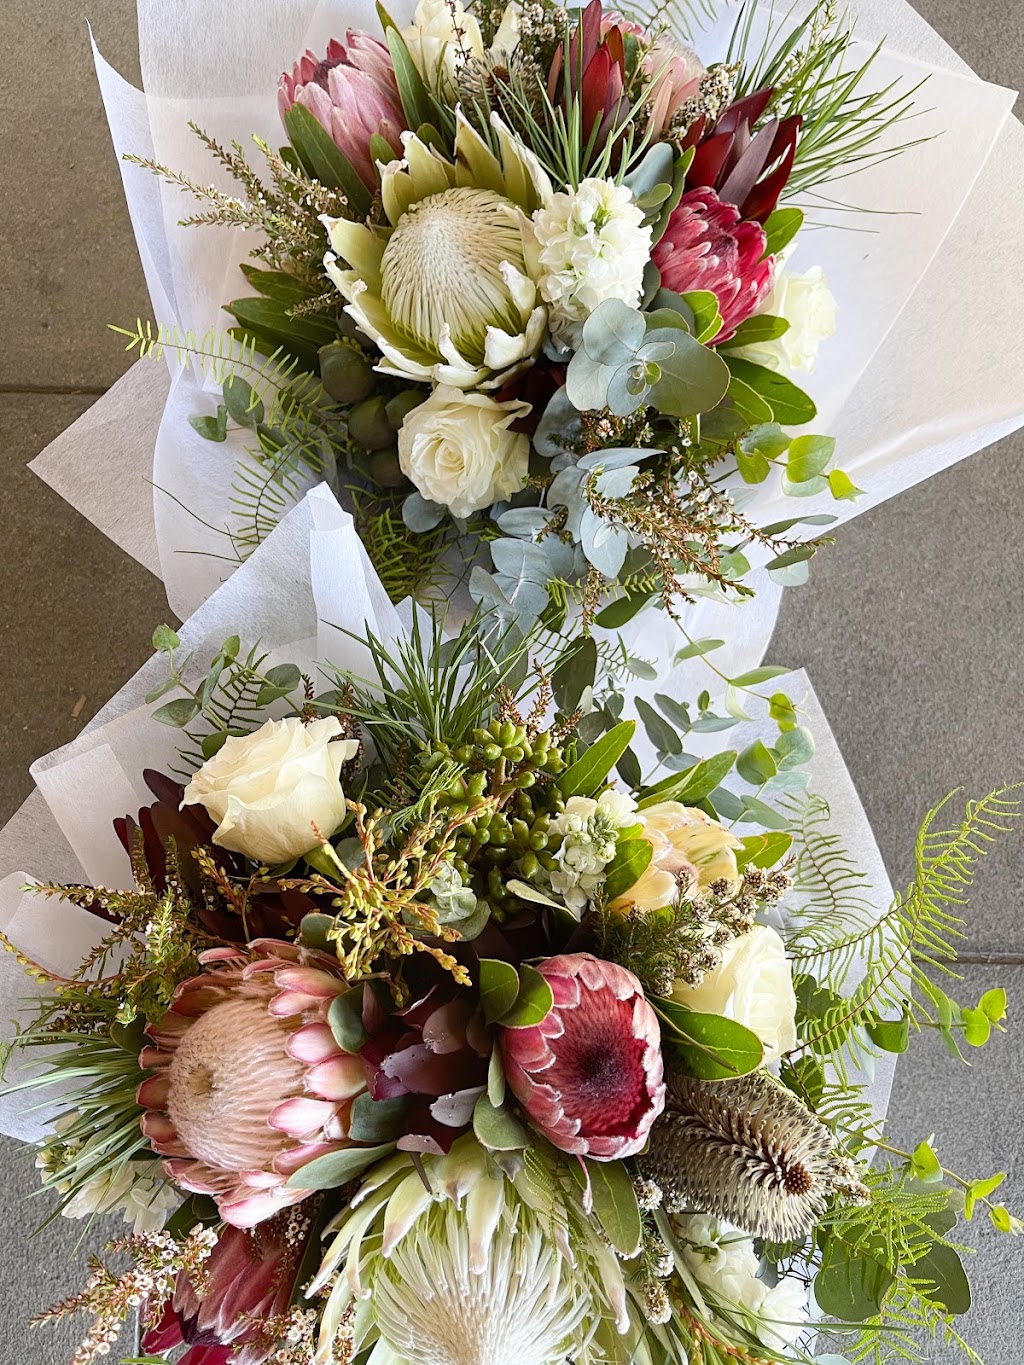 Blush and Blooms Floral Studio | florist | 59 Lumsdaine St, Picton NSW 2571, Australia | 0421648589 OR +61 421 648 589